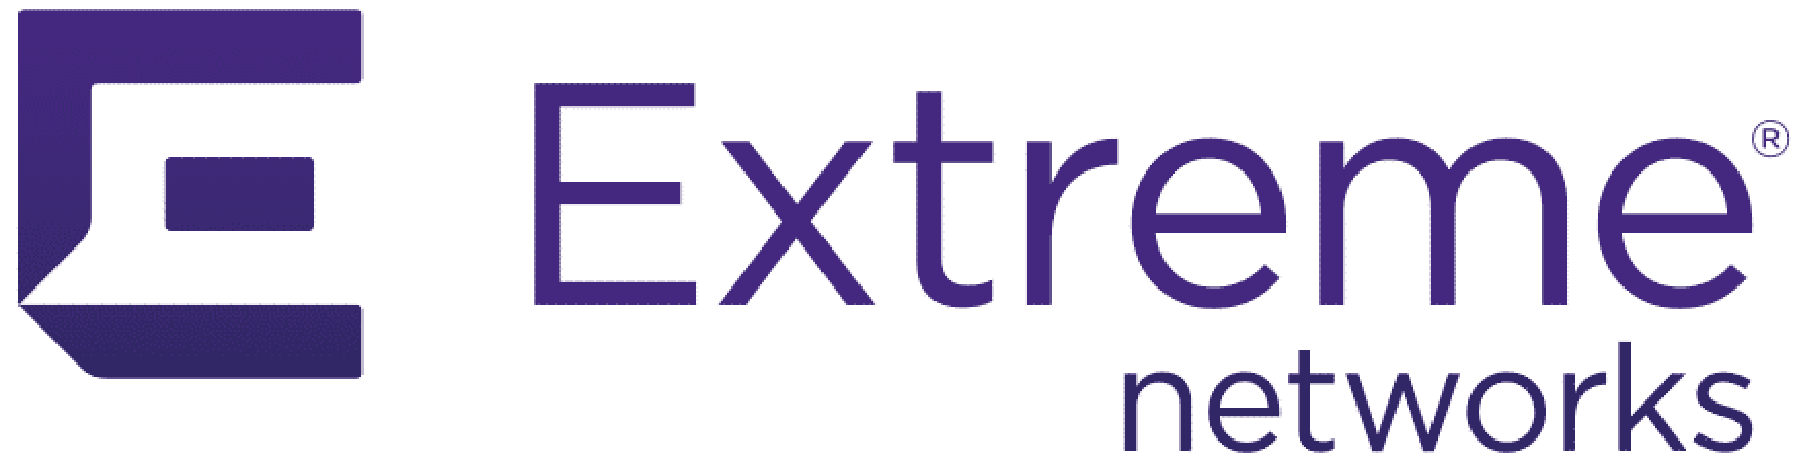 Extreme Networks logo Test.png